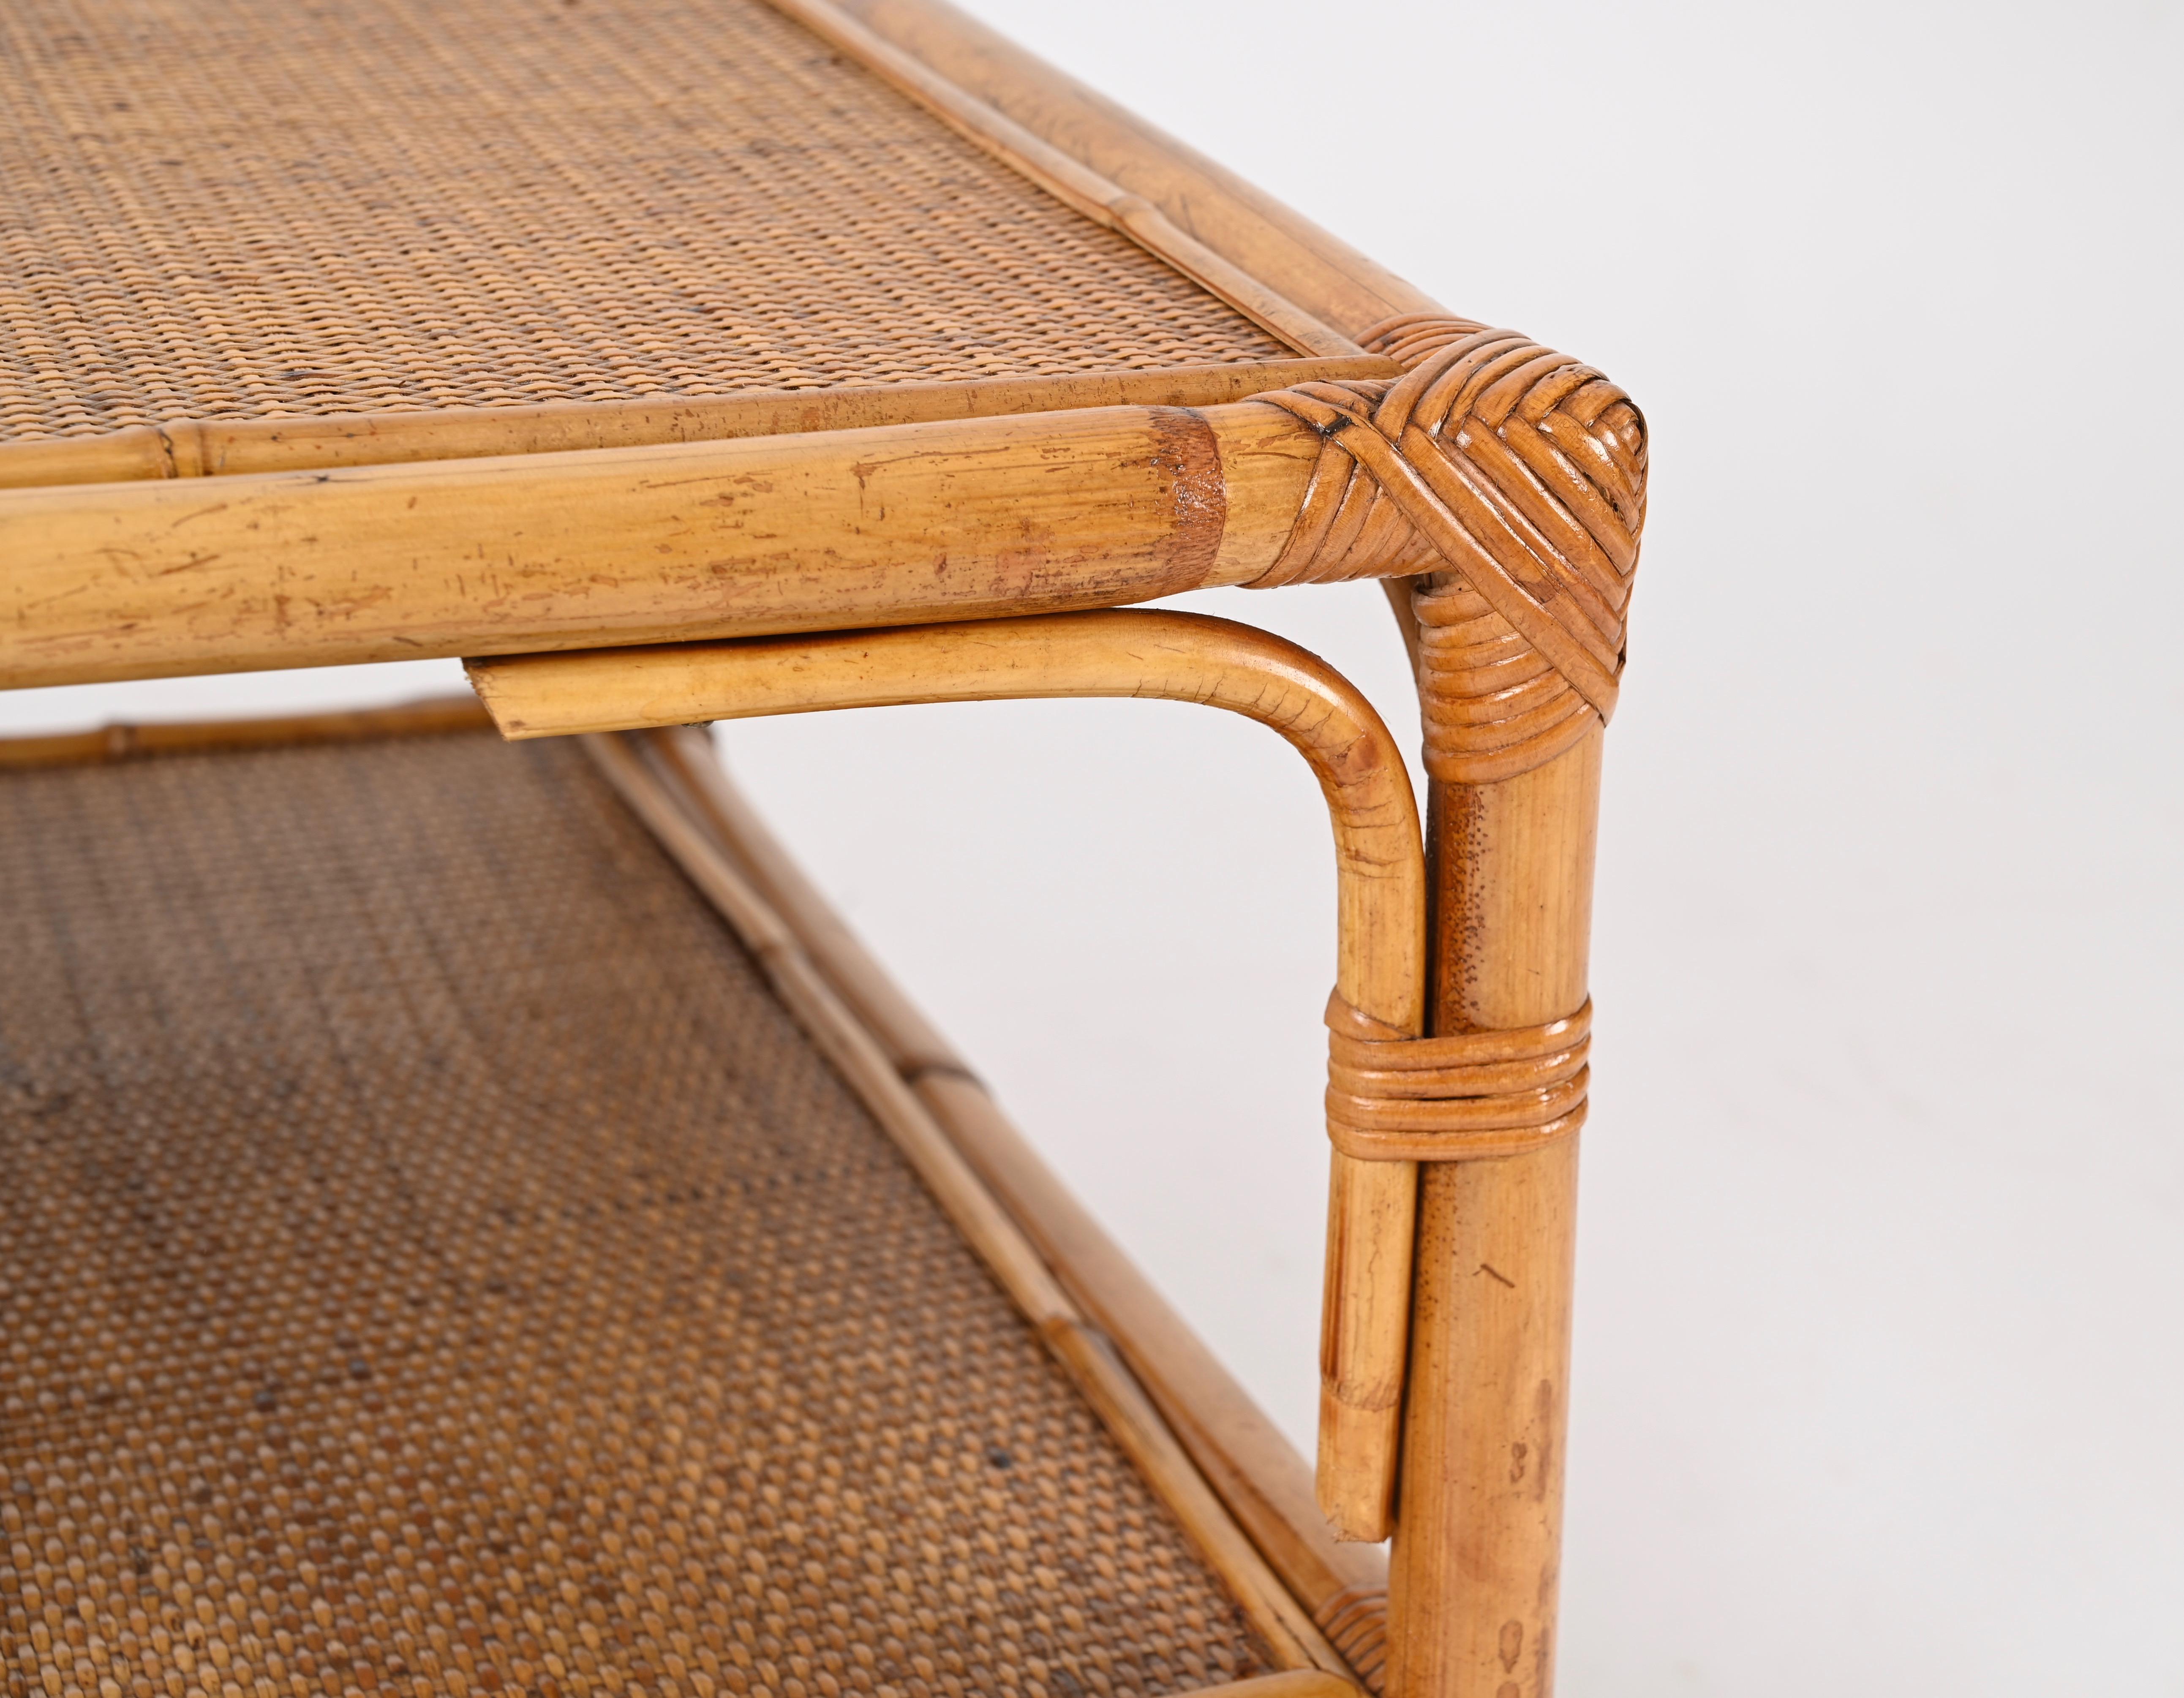 Vivai del Sud Midcentury Italian Square Coffee Table in Bamboo and Rattan, 1970s For Sale 3